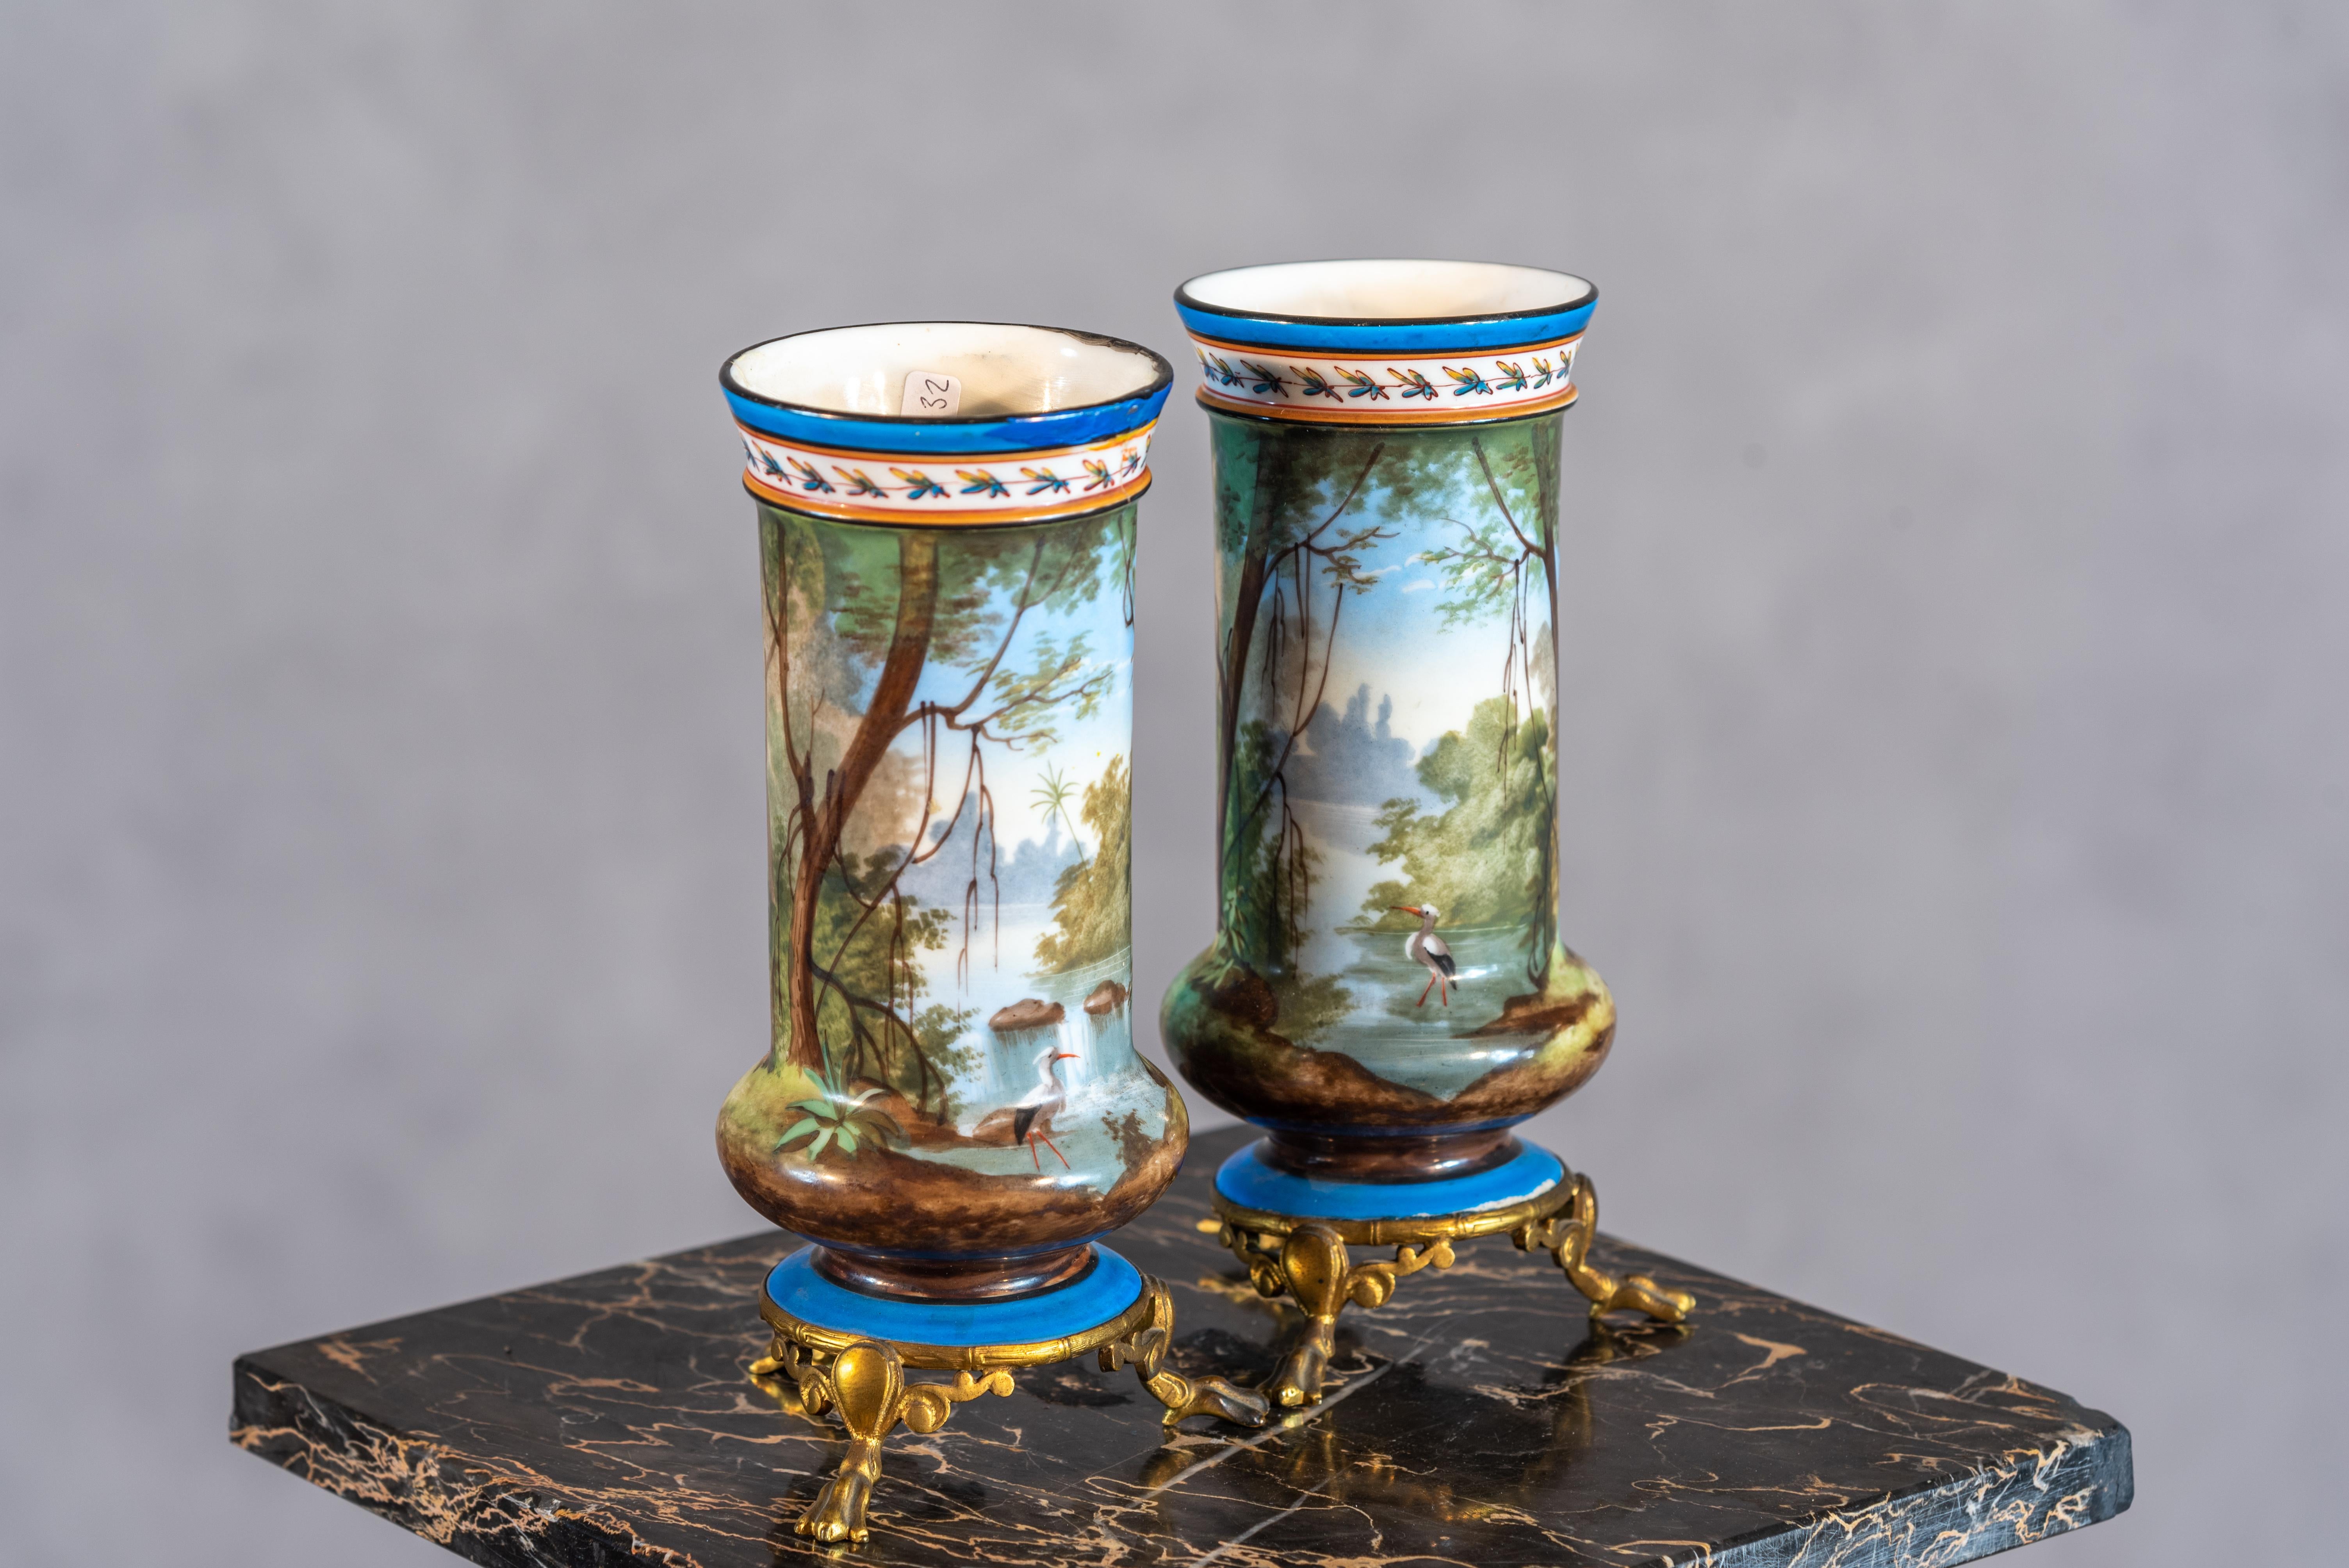 This enchanting pair of 19th-century vases, inspired by the renowned Sevres style, captures a picturesque scene of a tranquil lake framed by a dense forest, complete with a graceful heron in its natural habitat. The delicate artistry and attention